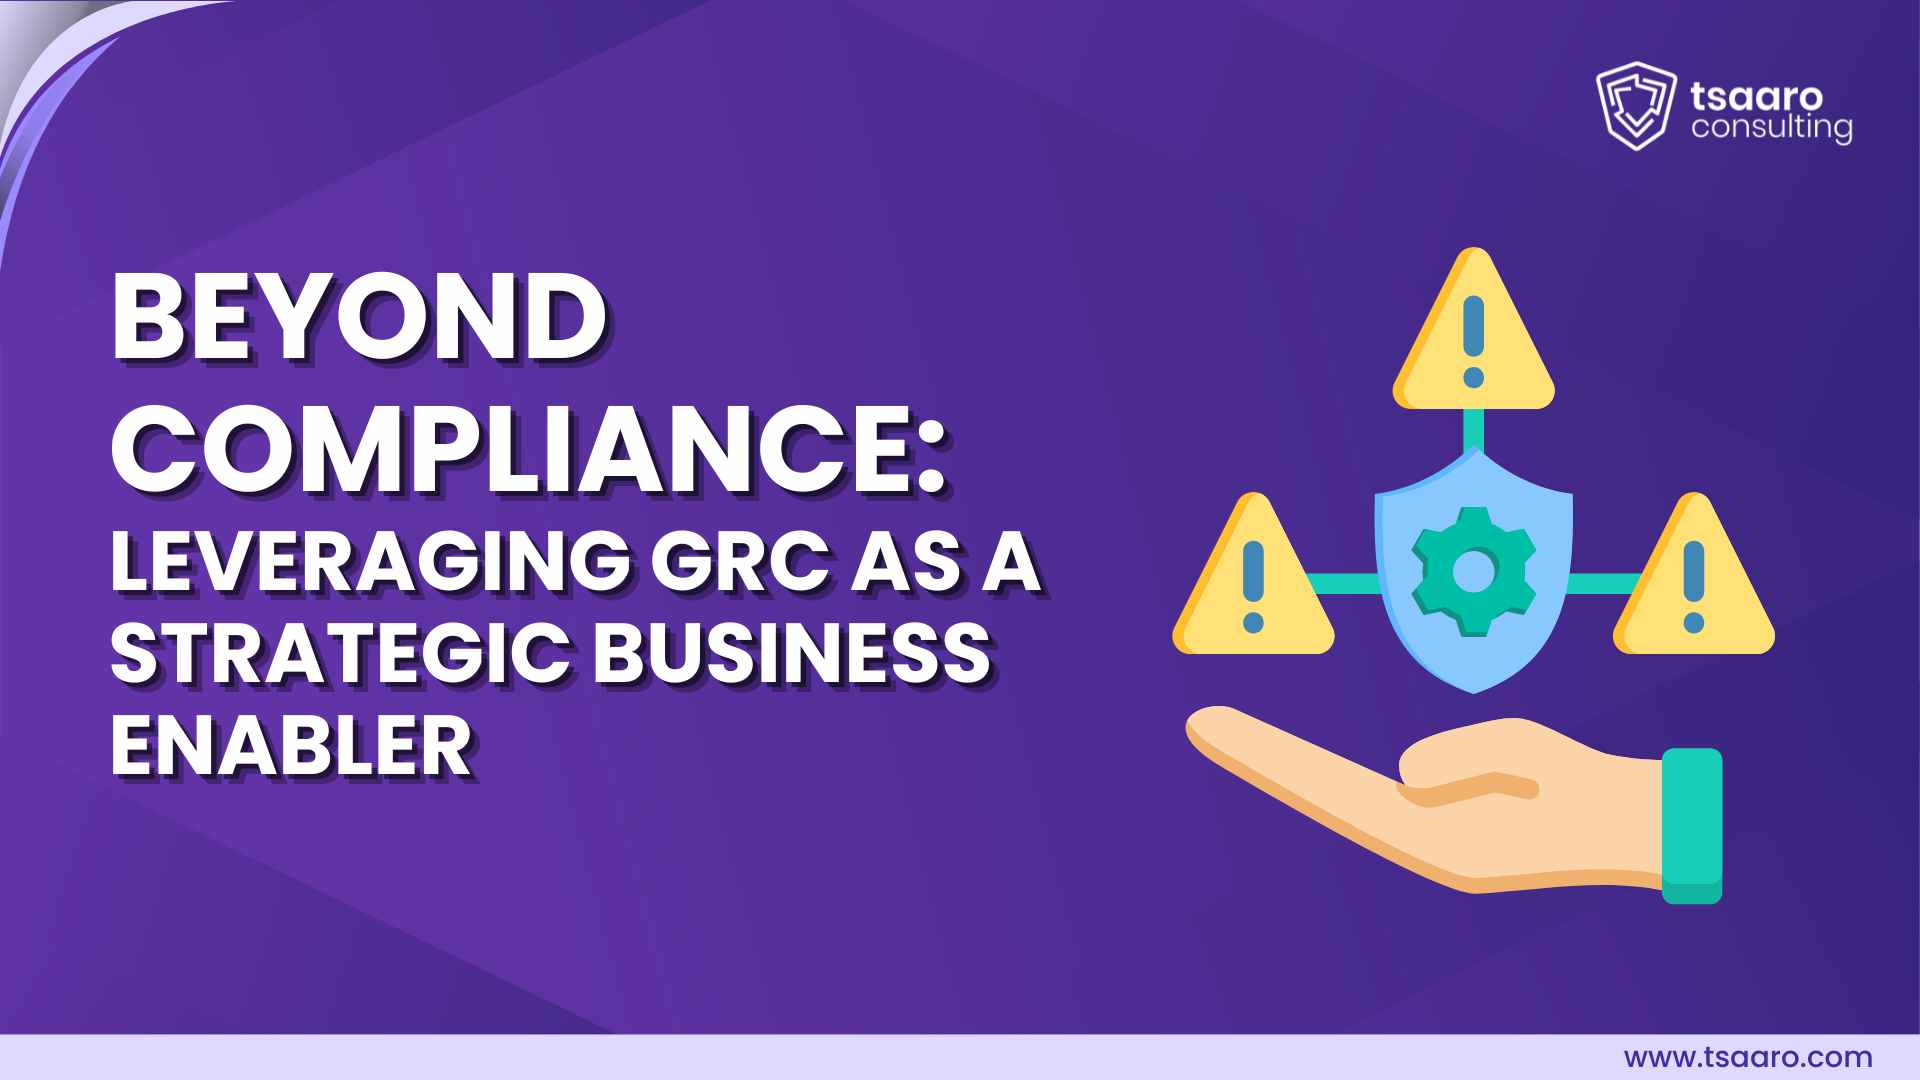 BEYOND COMPLIANCE: LEVERAGING GRC AS A STRATEGIC BUSINESS ENABLER